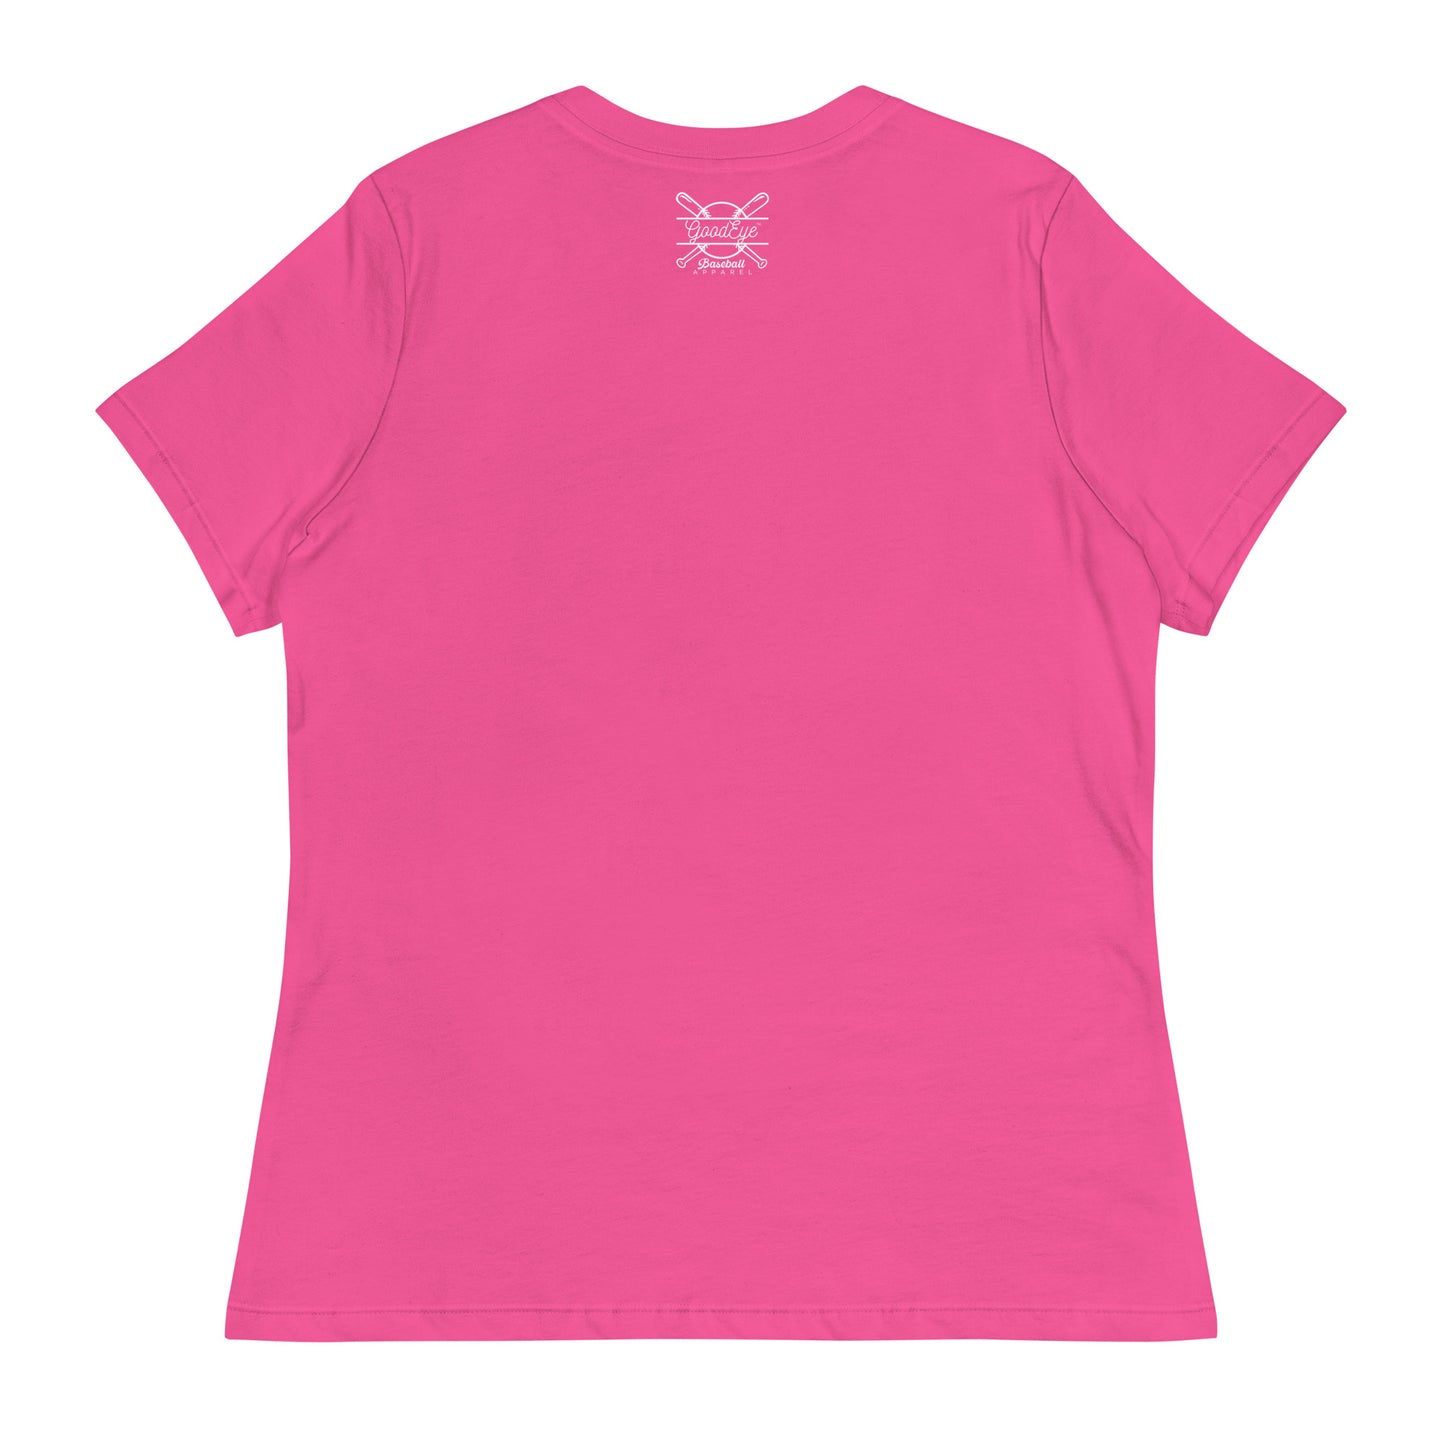 Women's "Sorry" Relaxed T-Shirt